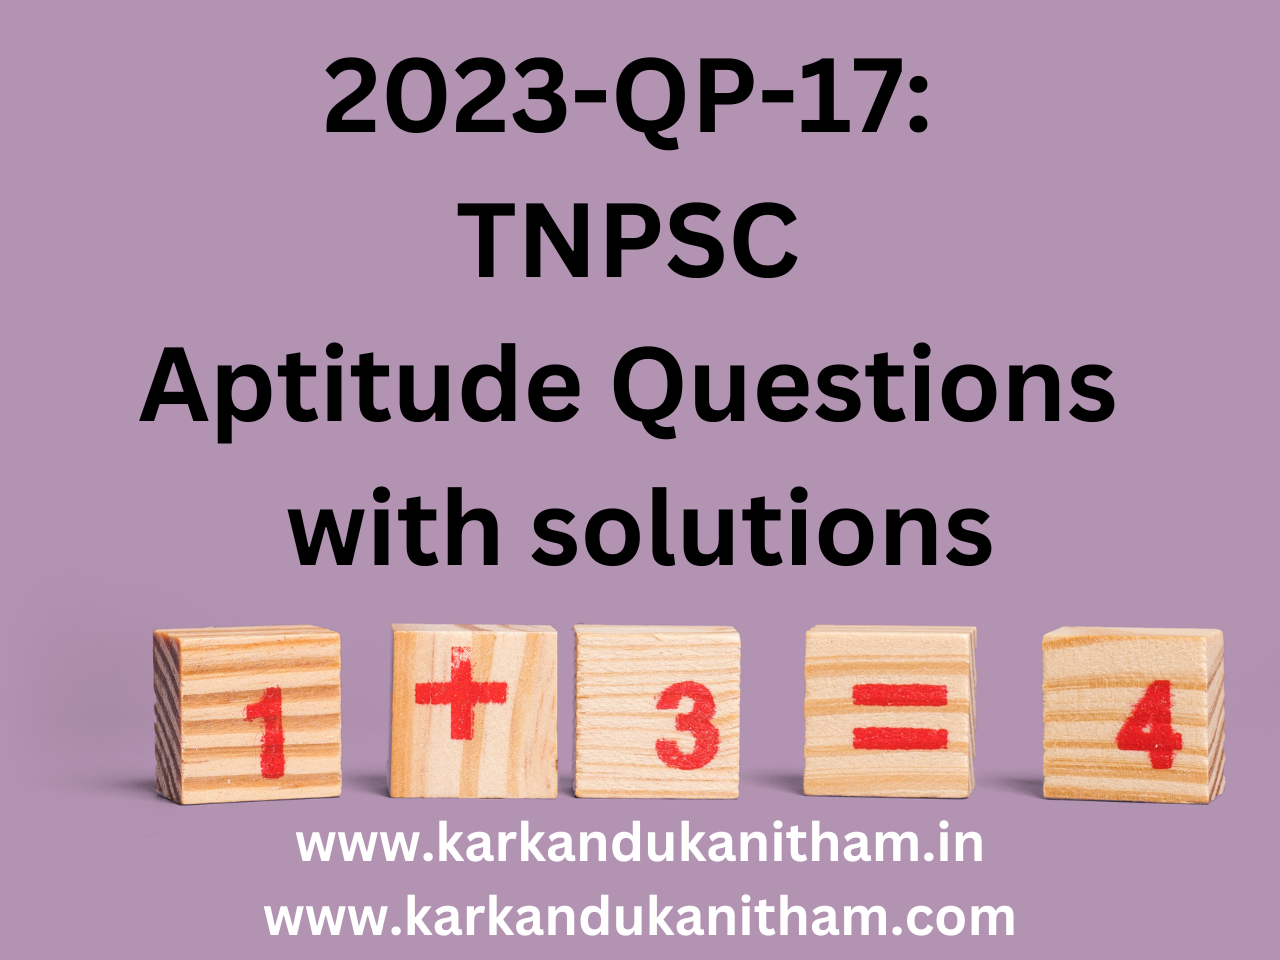 TNPSC Aptitude Questions with solutions